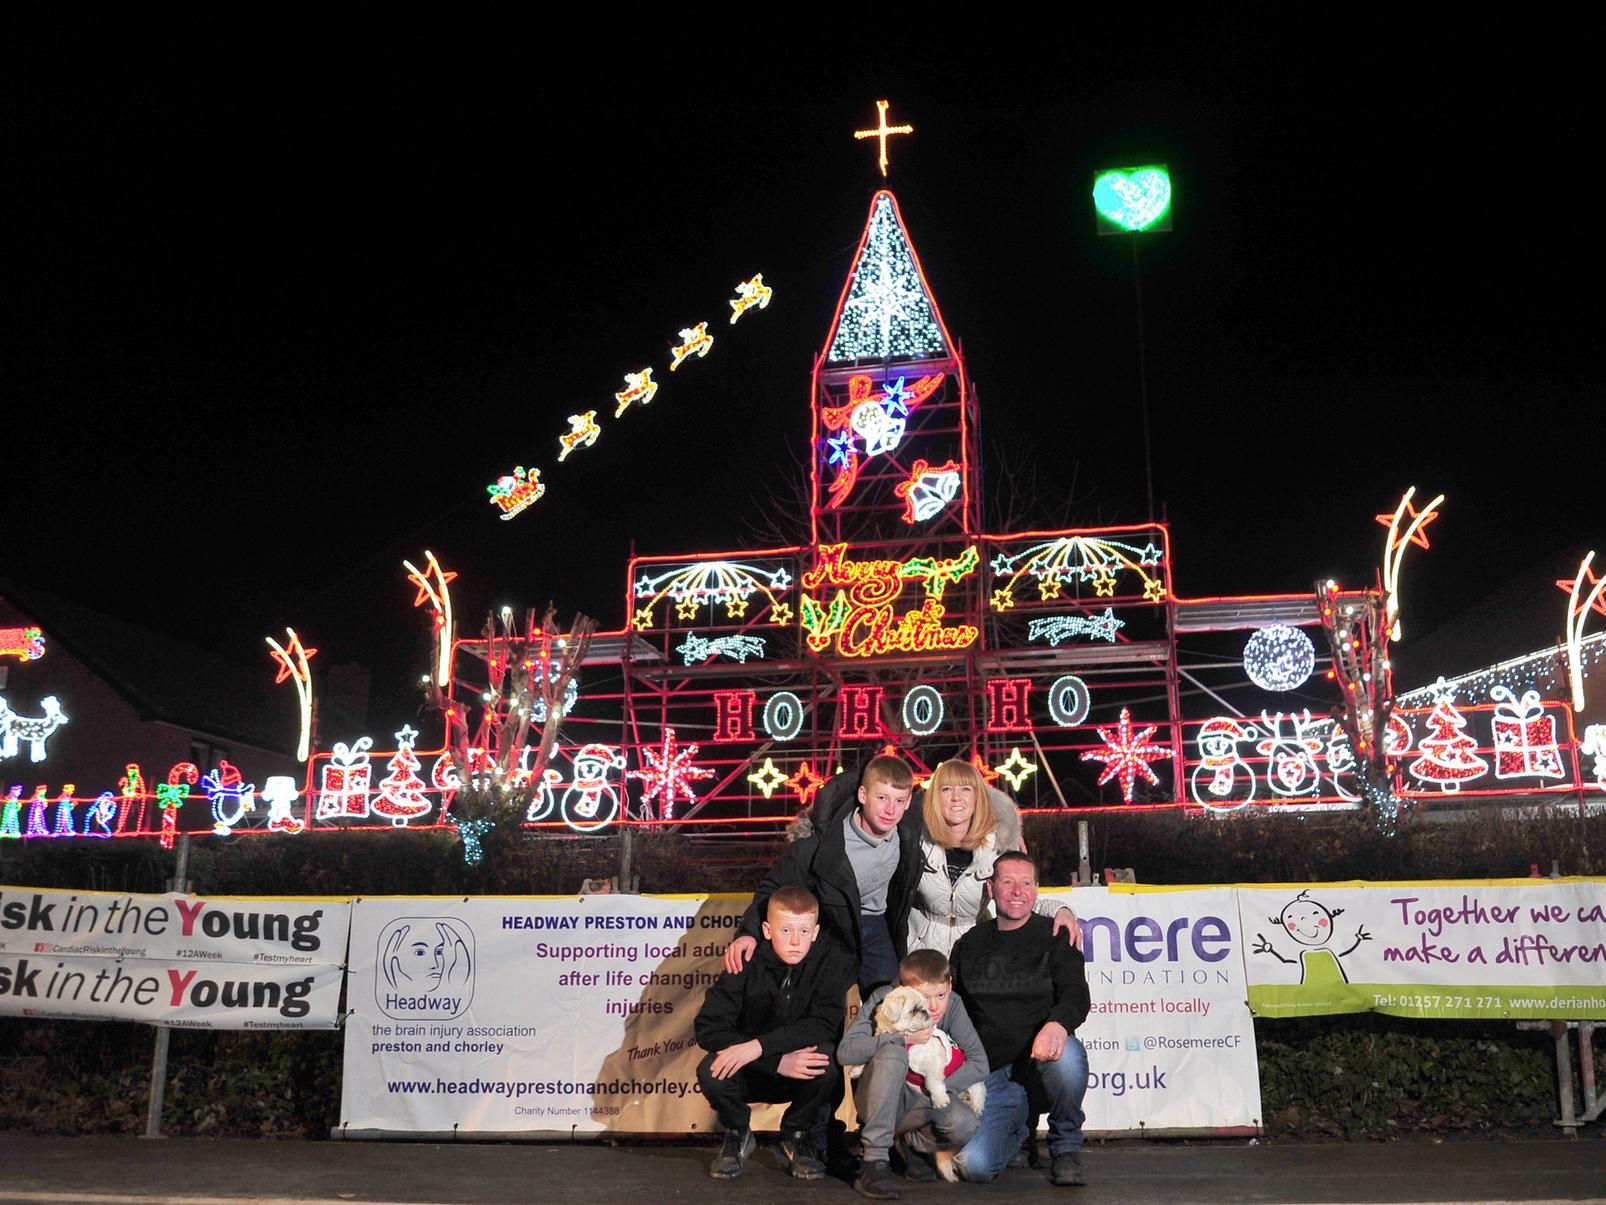 The Tipping family lights switch-on